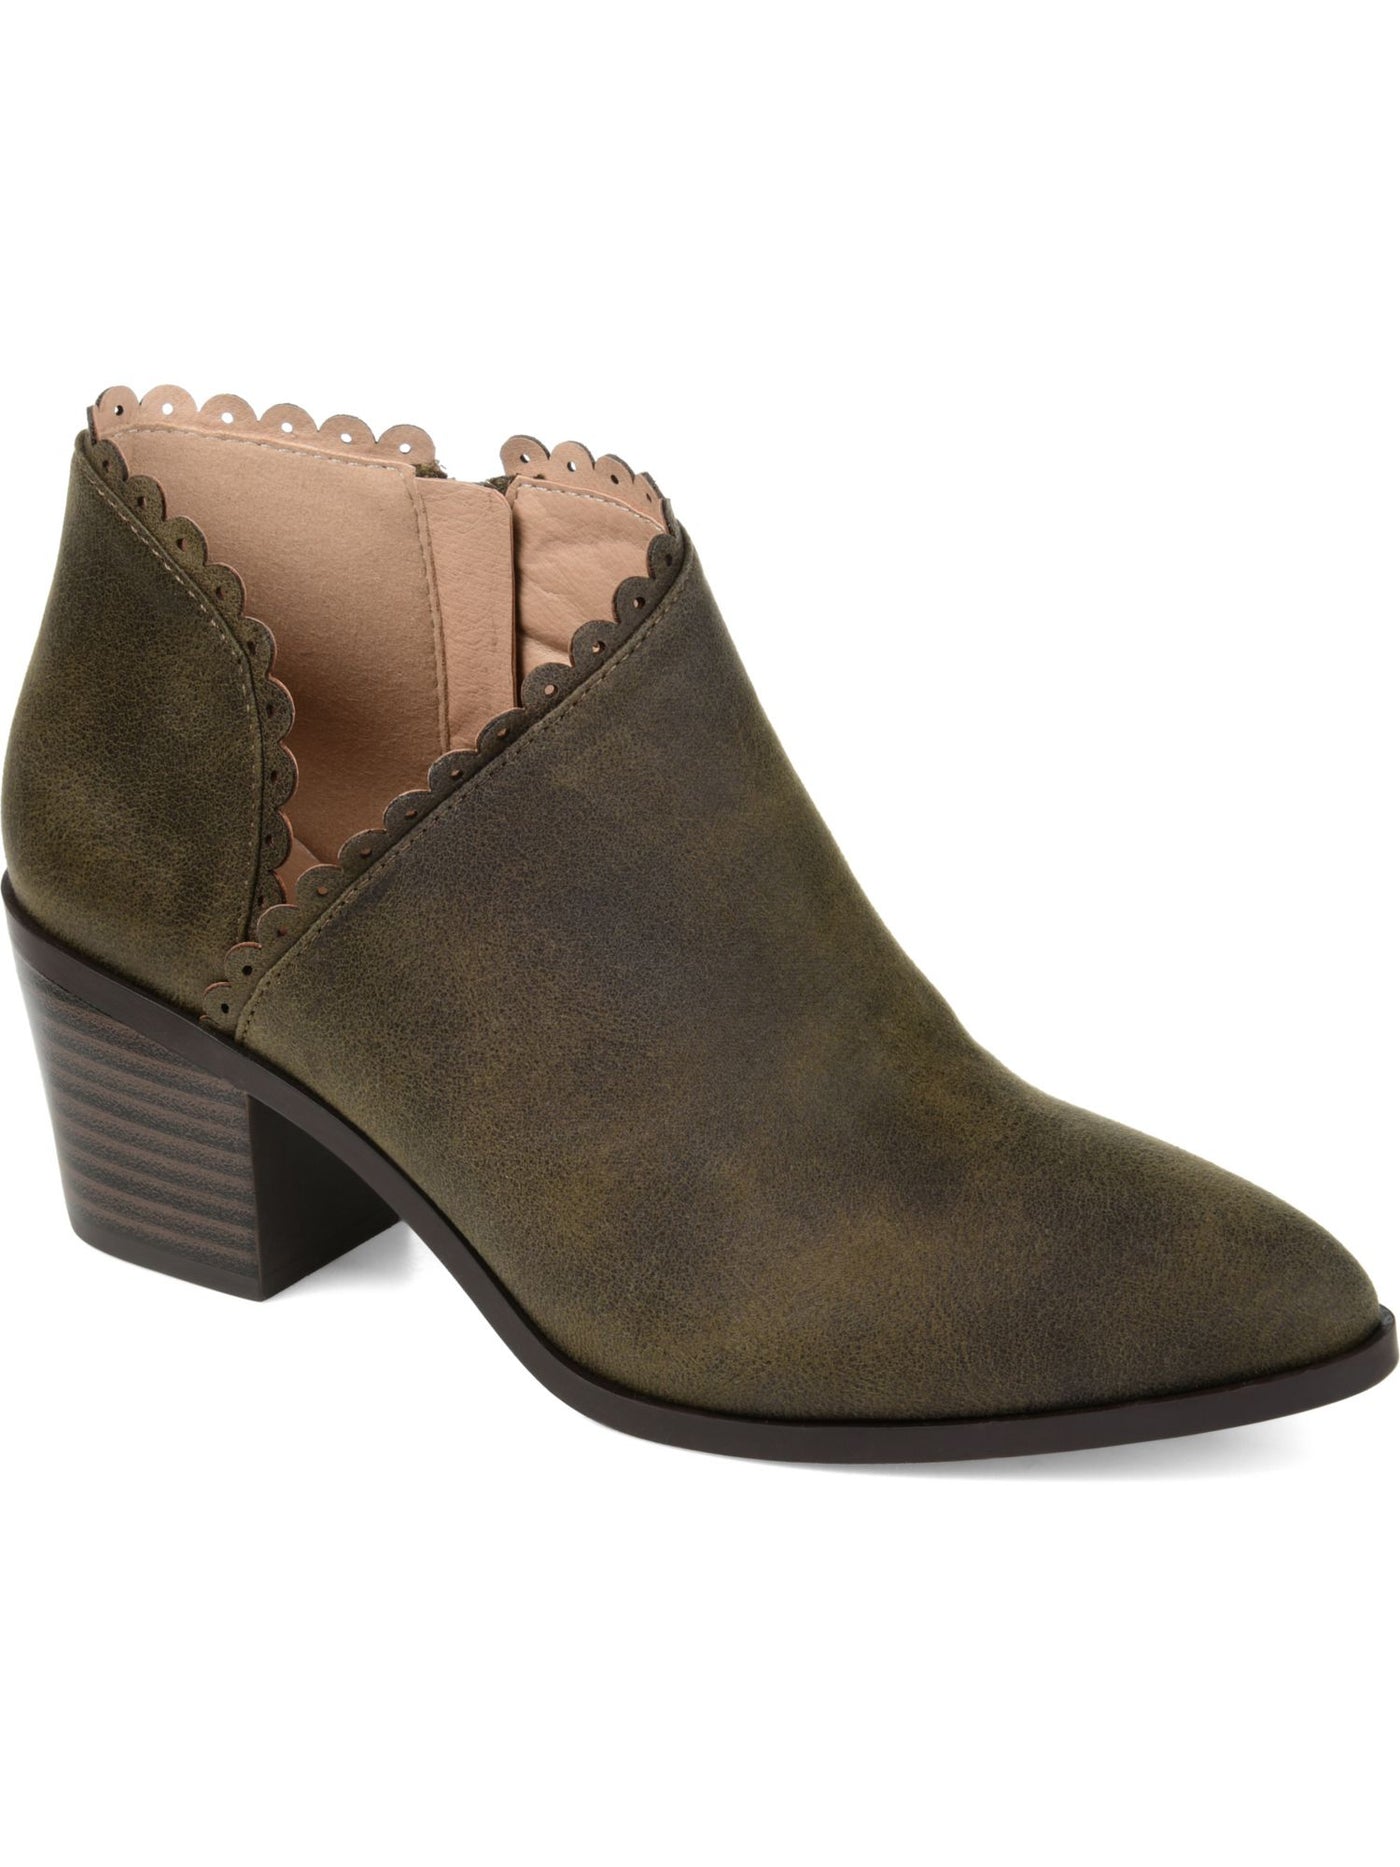 JOURNEE COLLECTION Womens Olive Green Lightly Padded Asymmetrical Scalloped Tessa Almond Toe Stacked Heel Zip-Up Booties 8